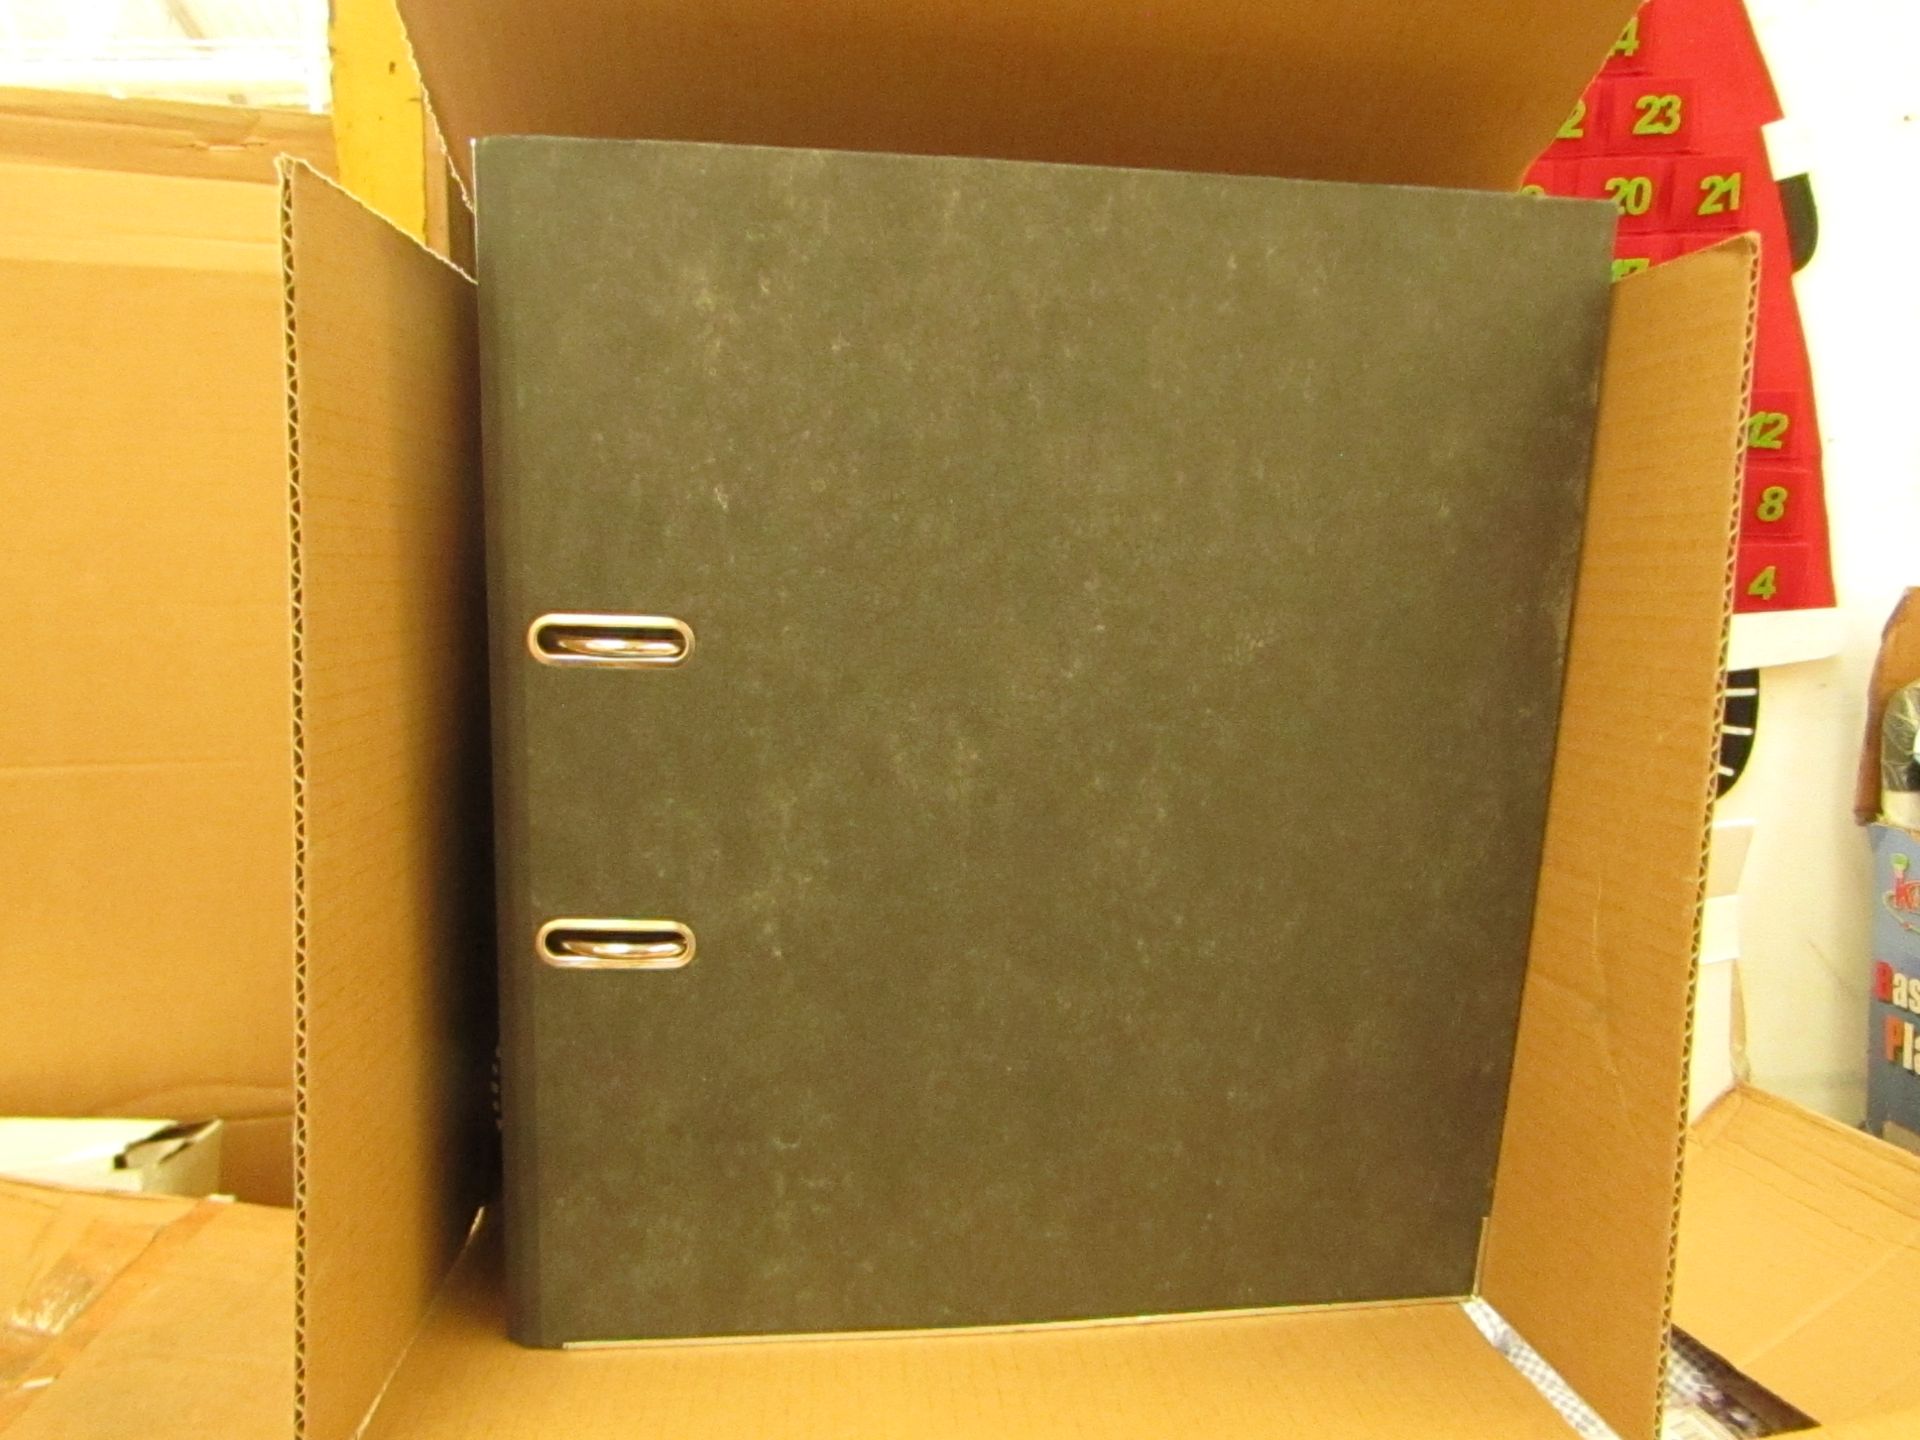 1x Box Containing 6x Arch 2-Hole Binder Files - Unused & Boxed.